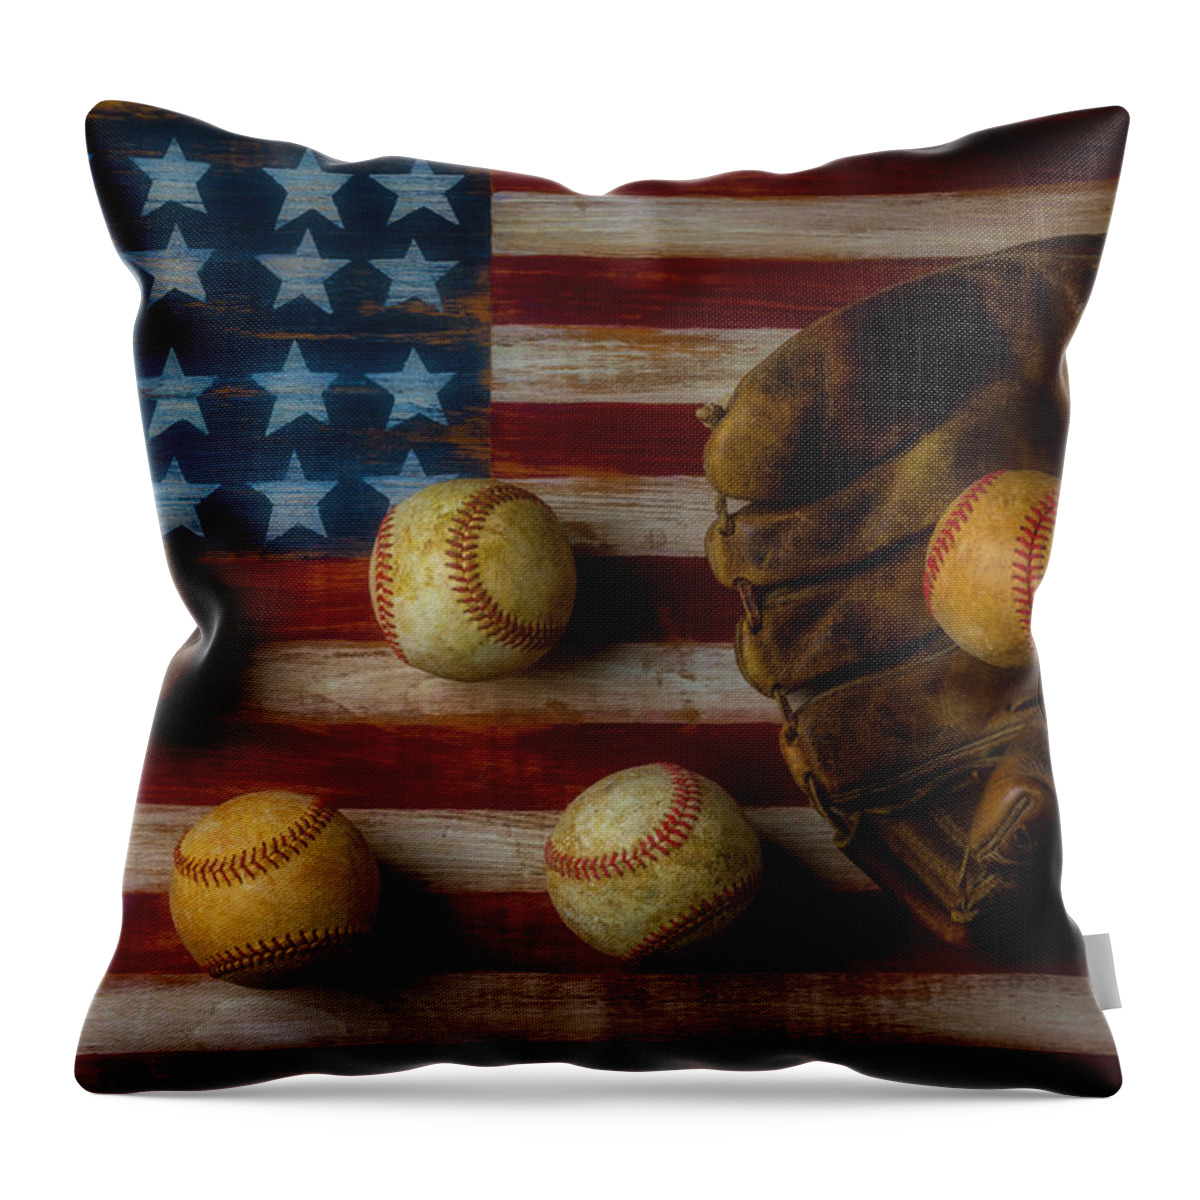 American Throw Pillow featuring the photograph Five Balls And Mitt by Garry Gay